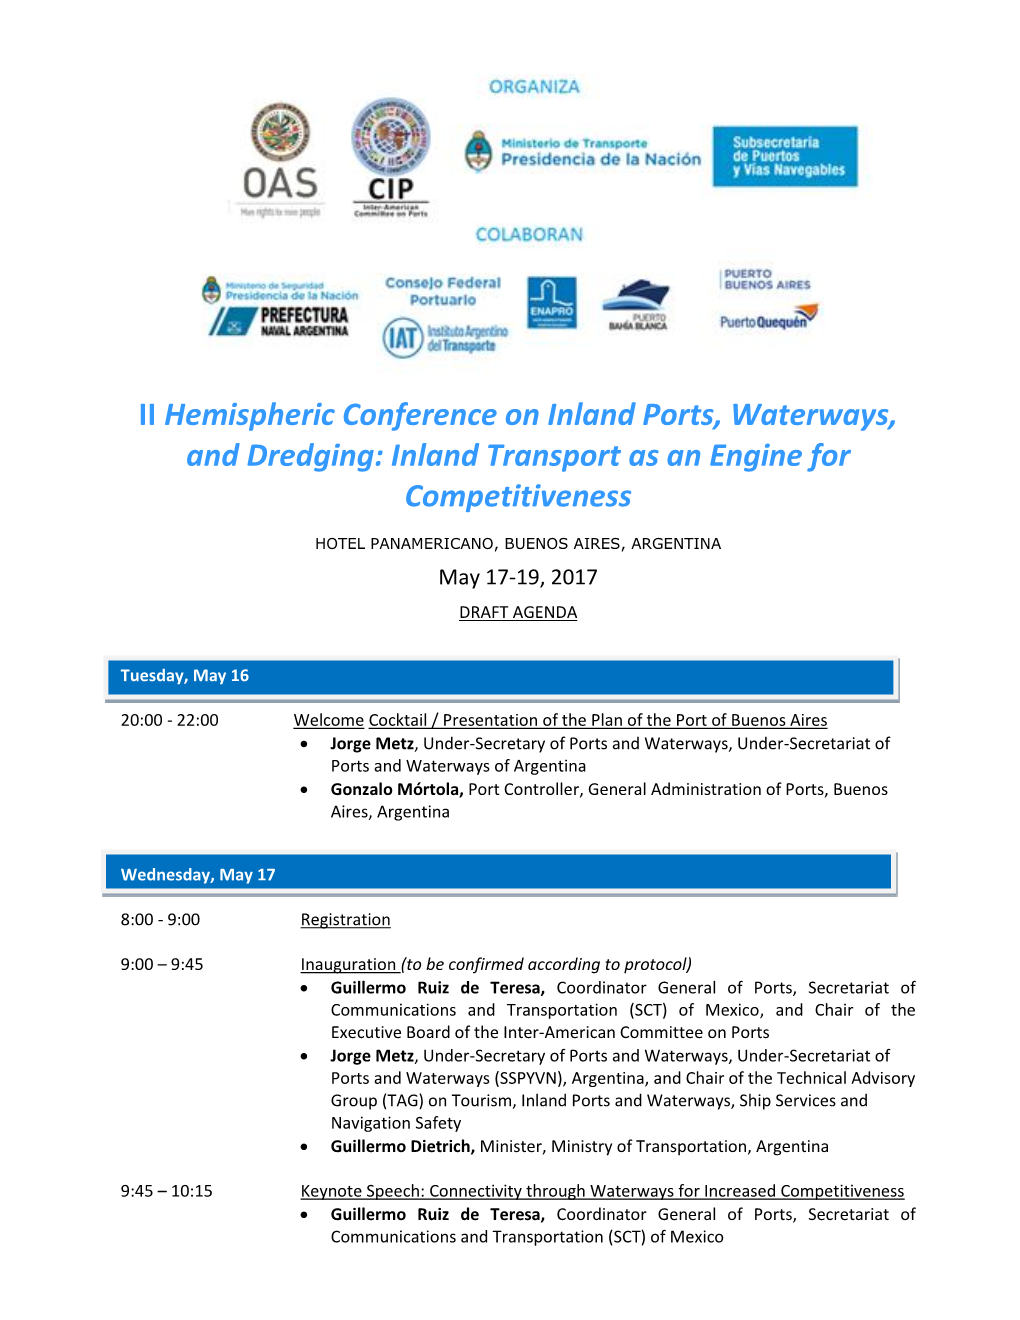 II Hemispheric Conference on Inland Ports, Waterways, and Dredging: Inland Transport As an Engine for Competitiveness